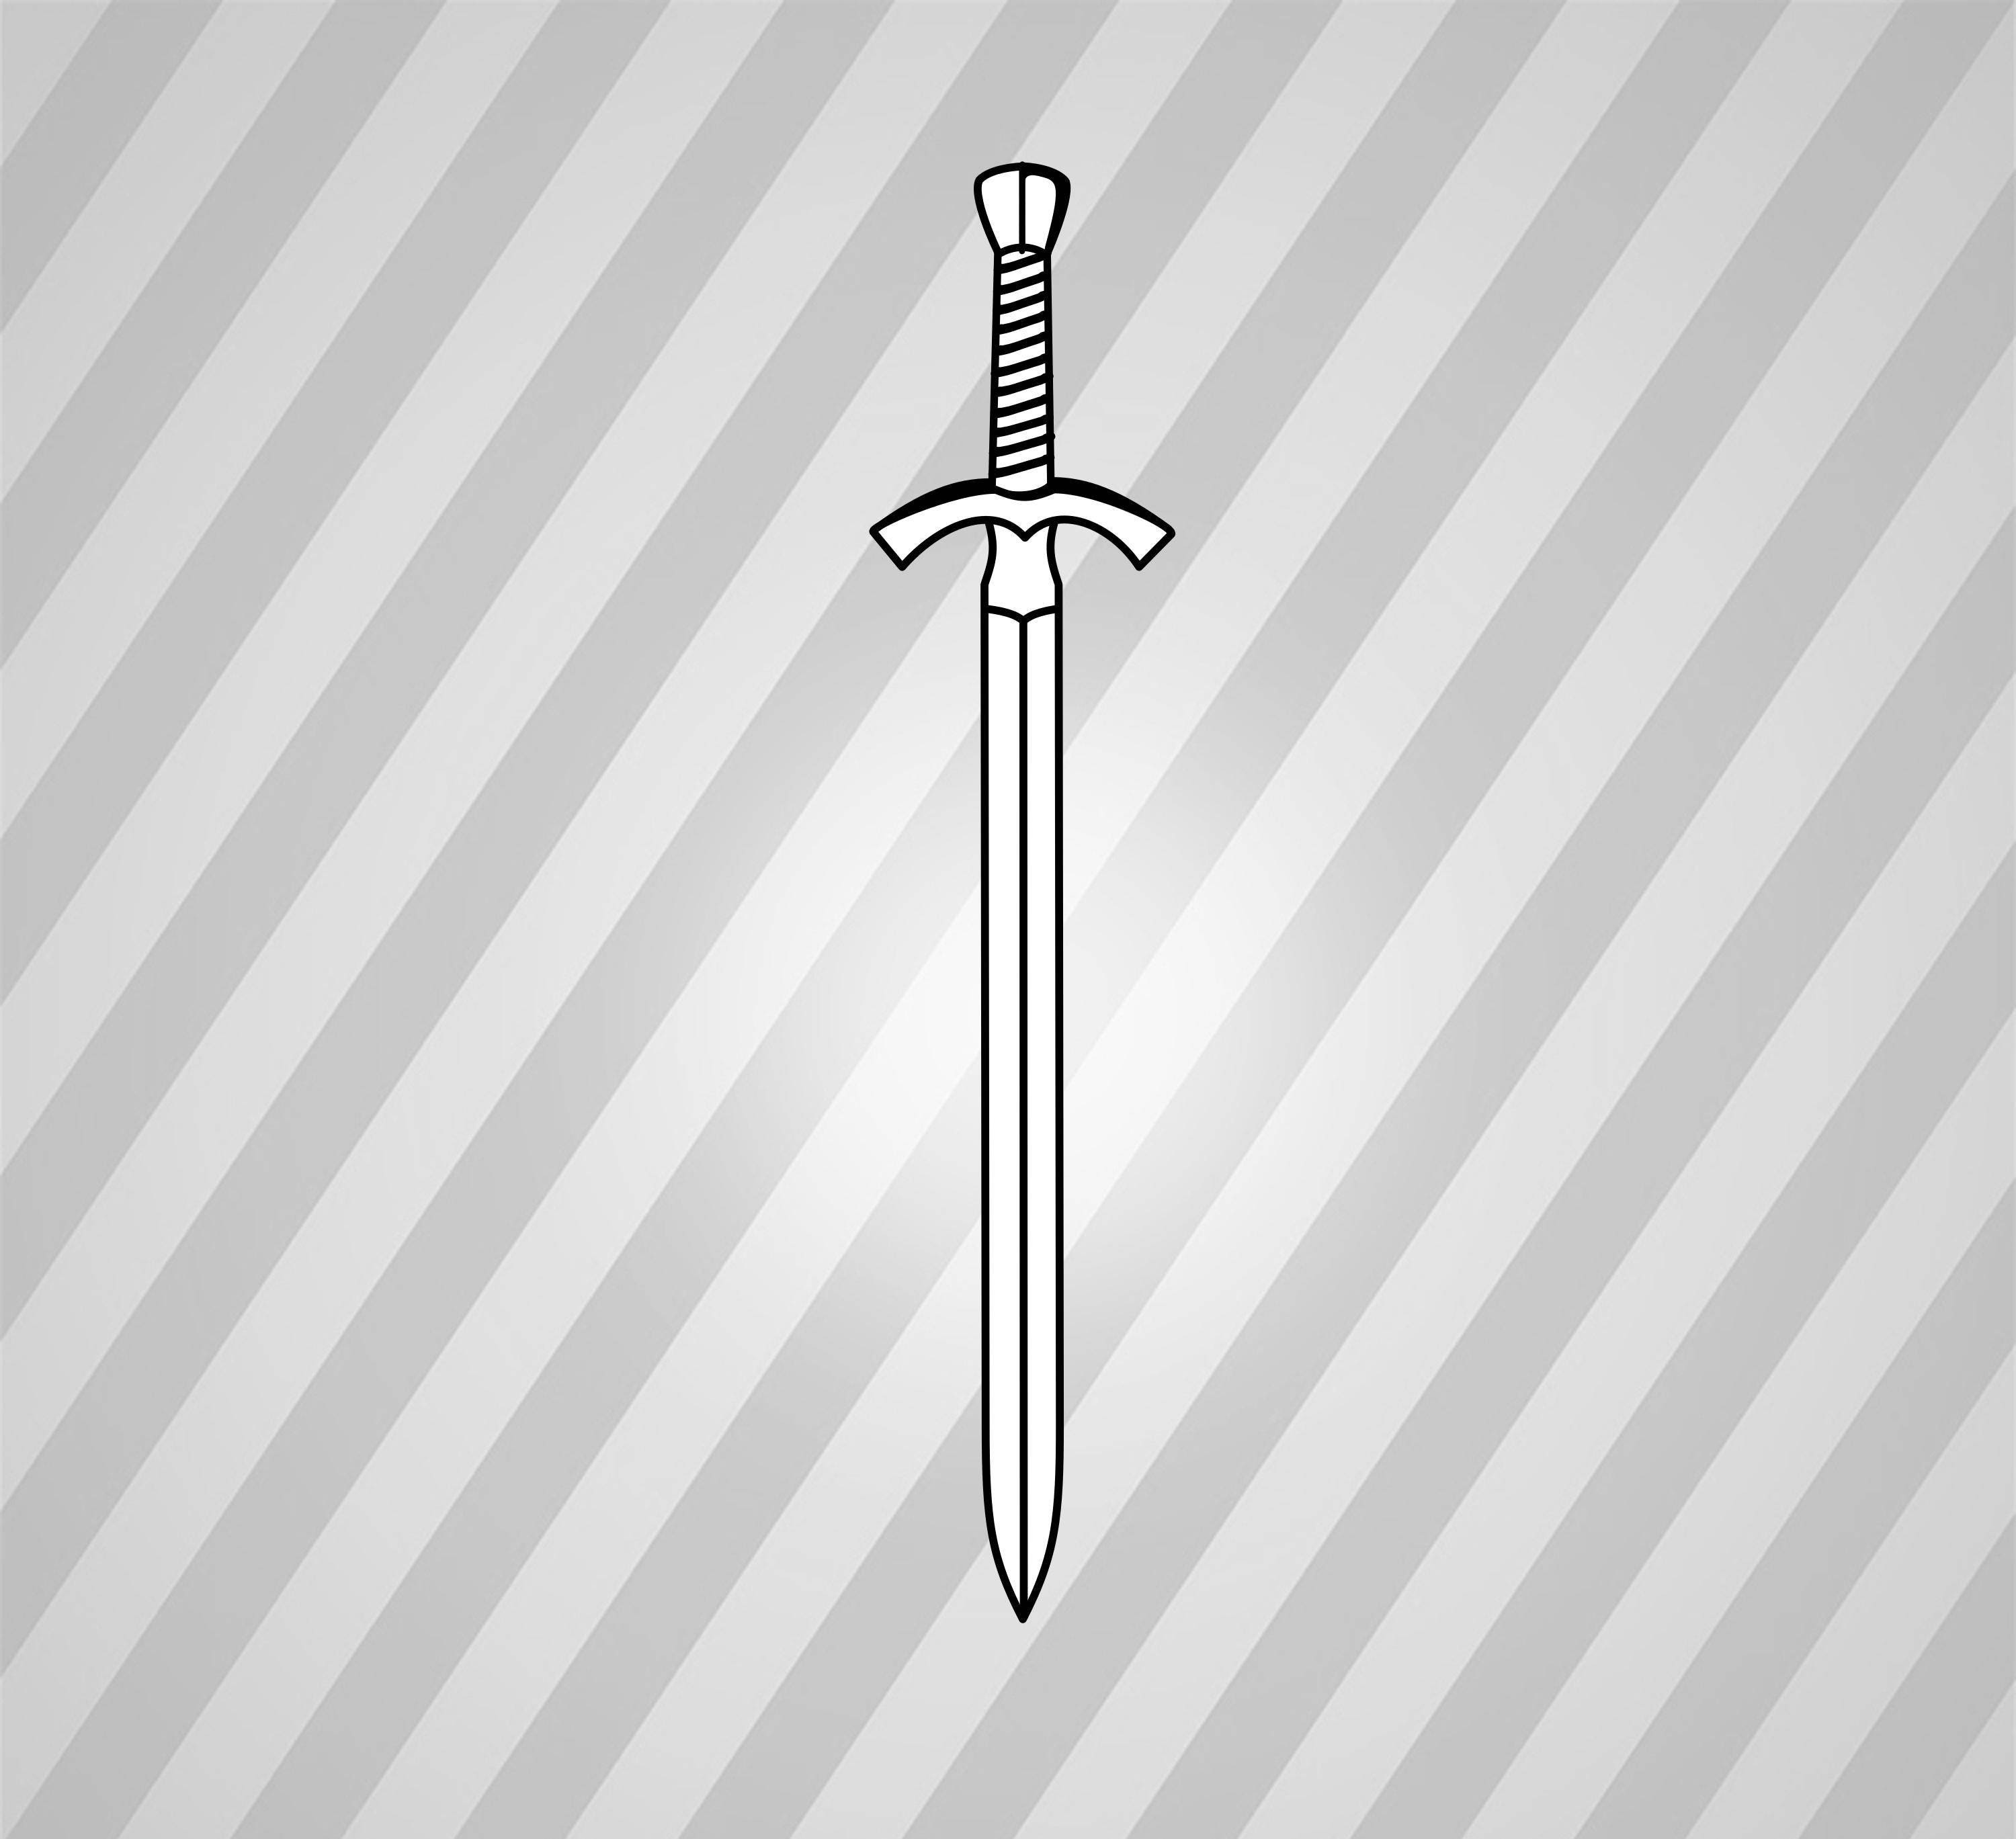 Download Sword Two Edged Swords - Svg Dxf Eps Silhouette Rld ...